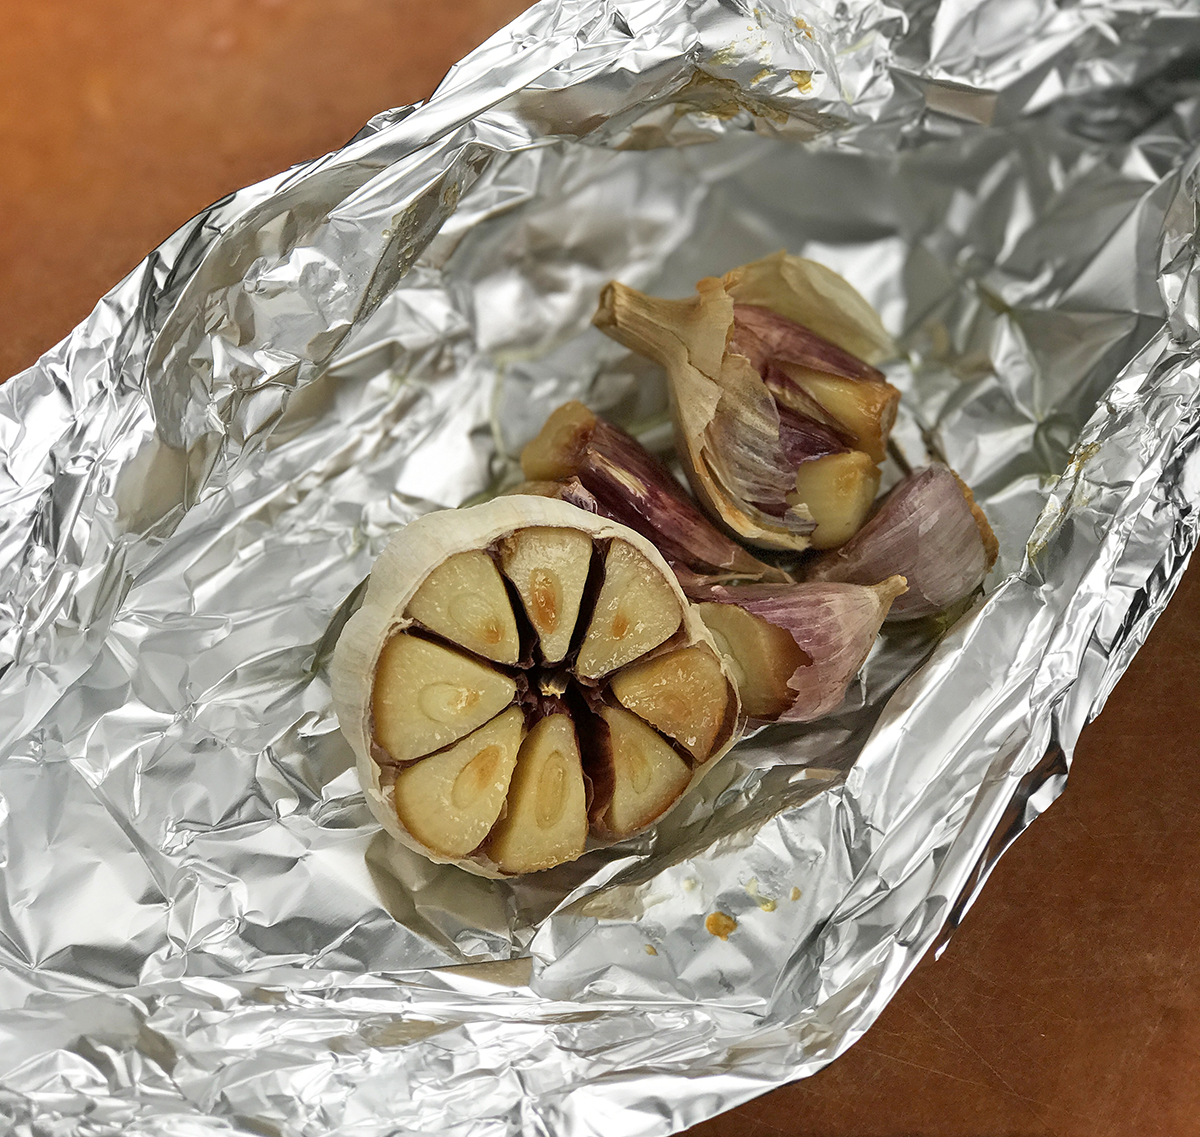 Foil open with roasted garlic cloves.